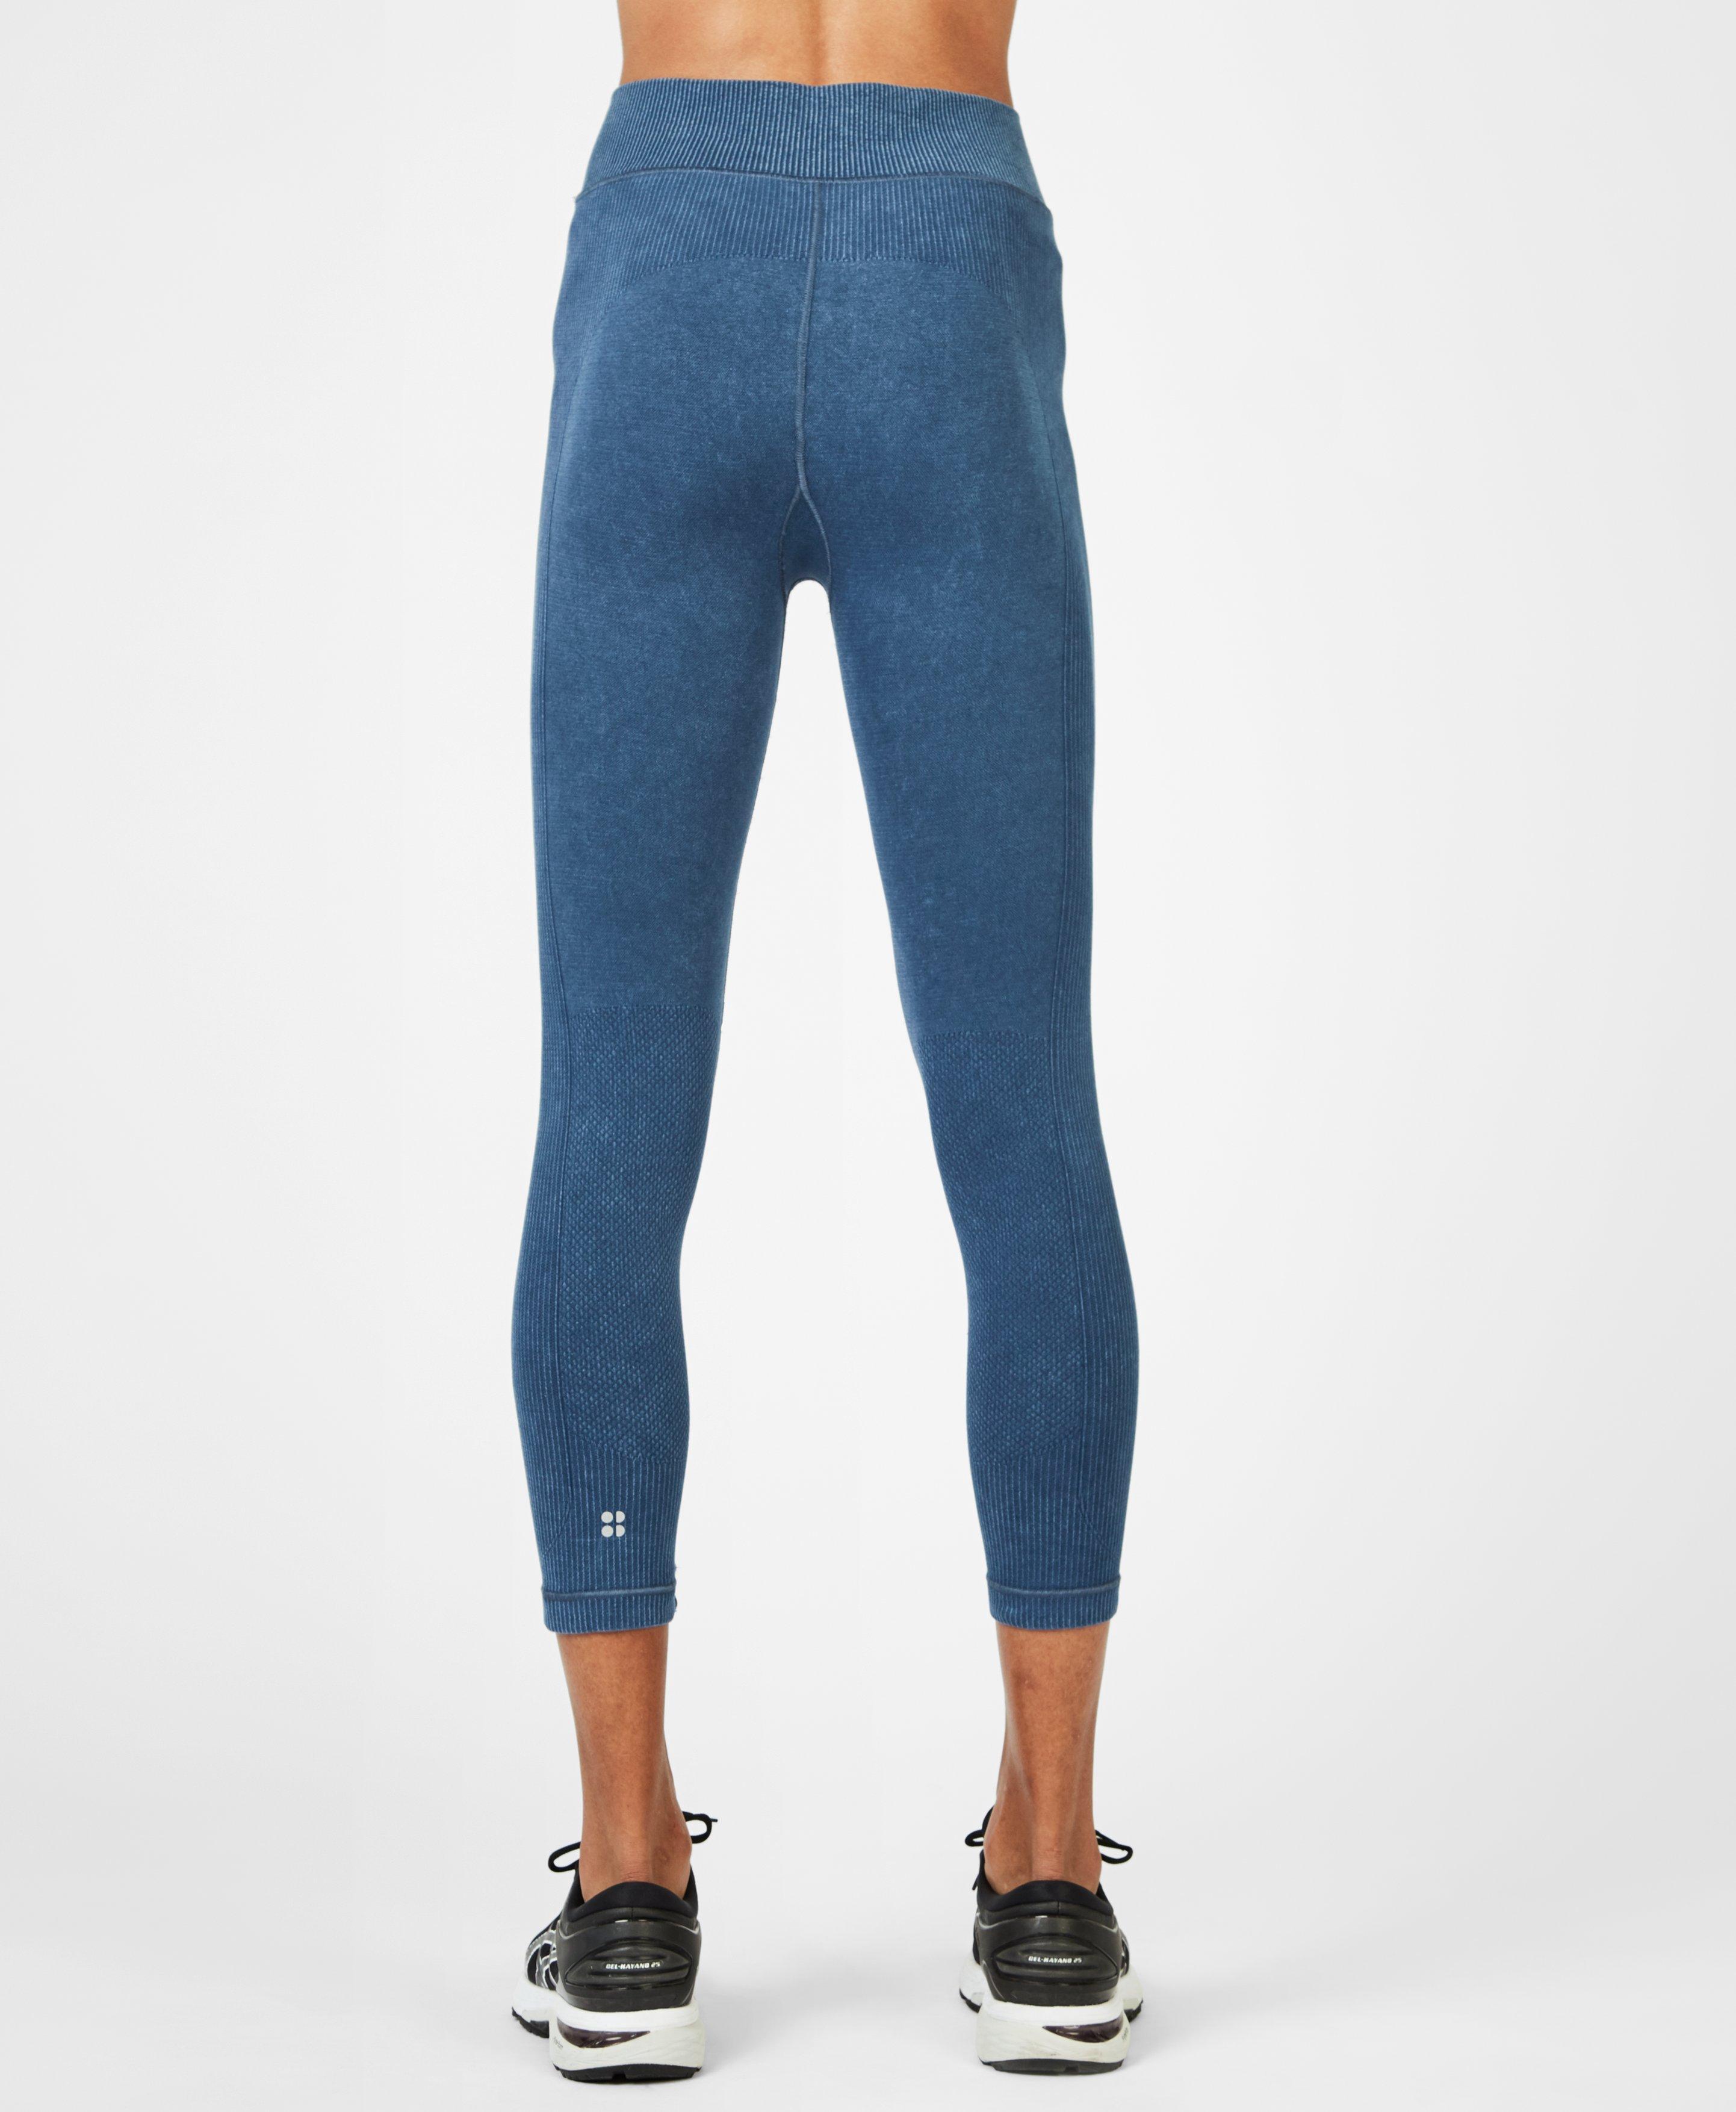 Do Sweaty Betty Leggings Stretch Over Time